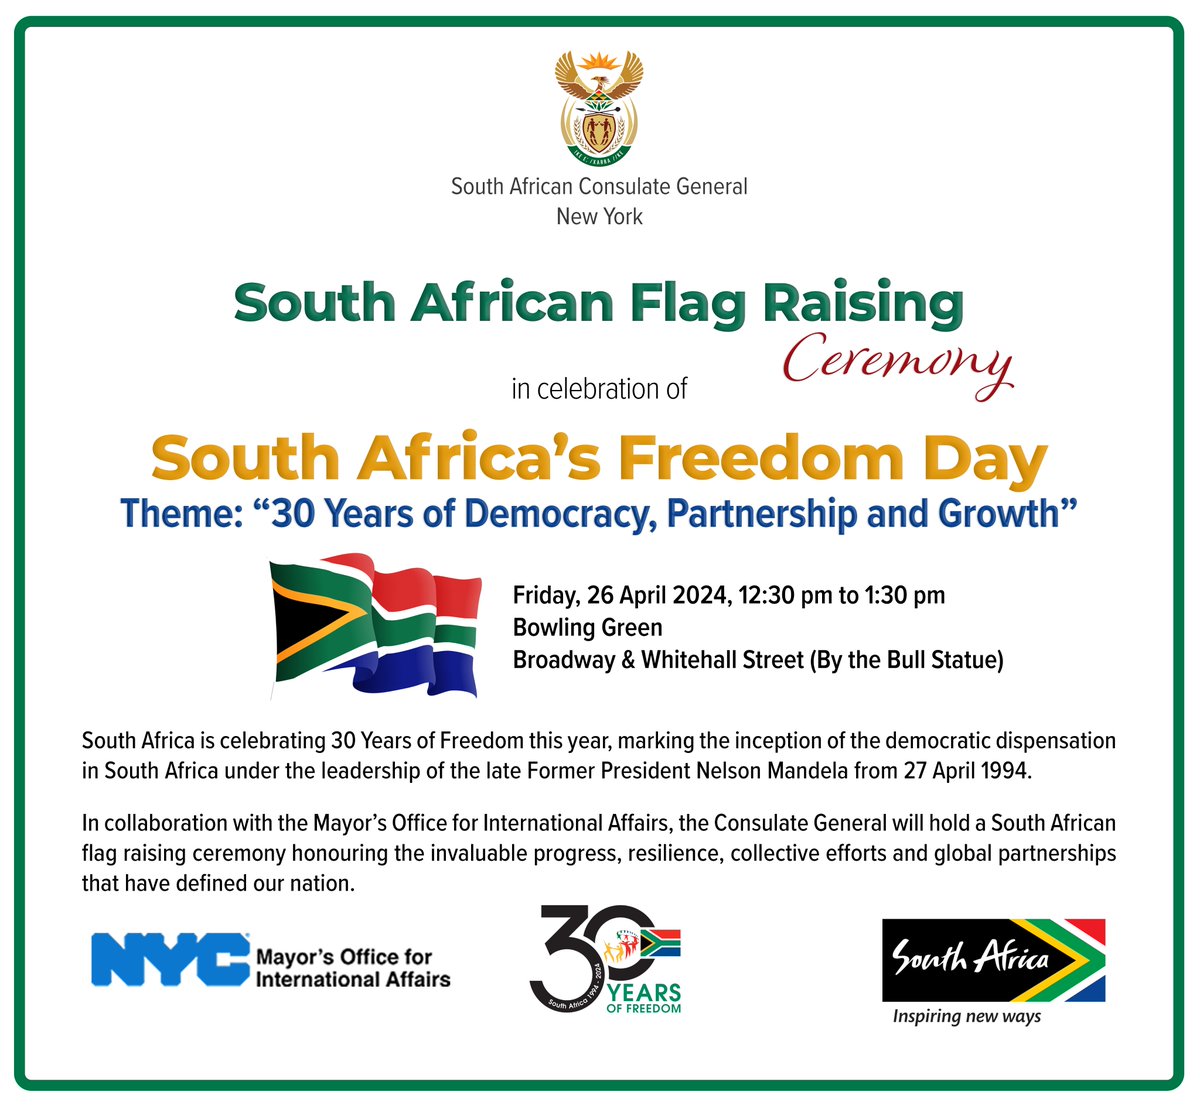 In collaboration with the @globalnyc, the @SACGNY will hold a South African flag raising ceremony at Bowling Green, Broadway & Whitehall Street (By the Bull Statue) on Friday, 26 April 2024, from 12:30 to 1:30 pm.  See you there! #SAinNY #30YearsOfFreedom